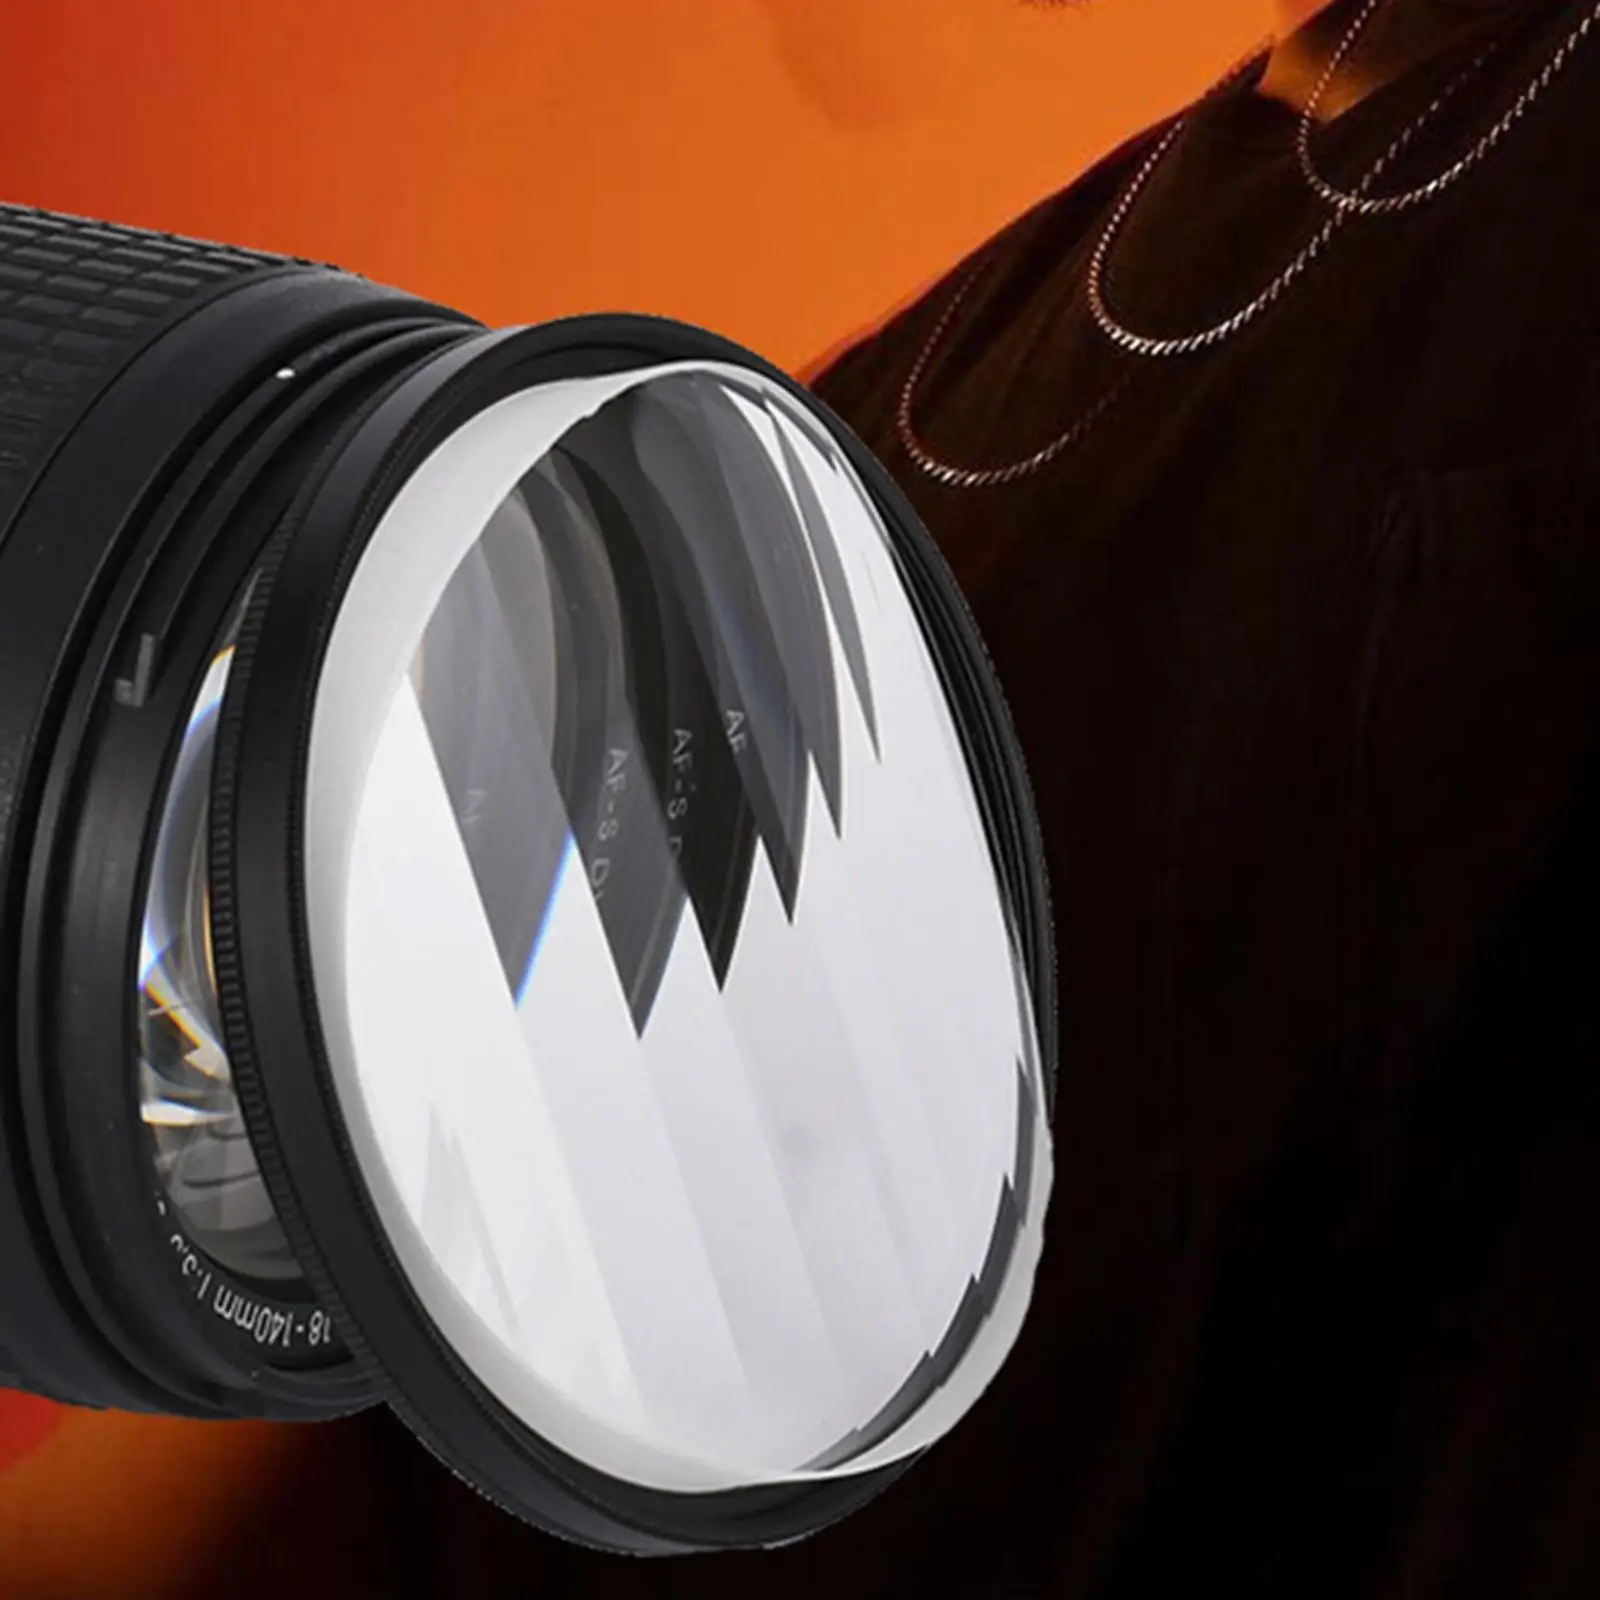 Camera Filter Photography Accessories Special Effects Lens Achieve Glare Effect Aluminum for